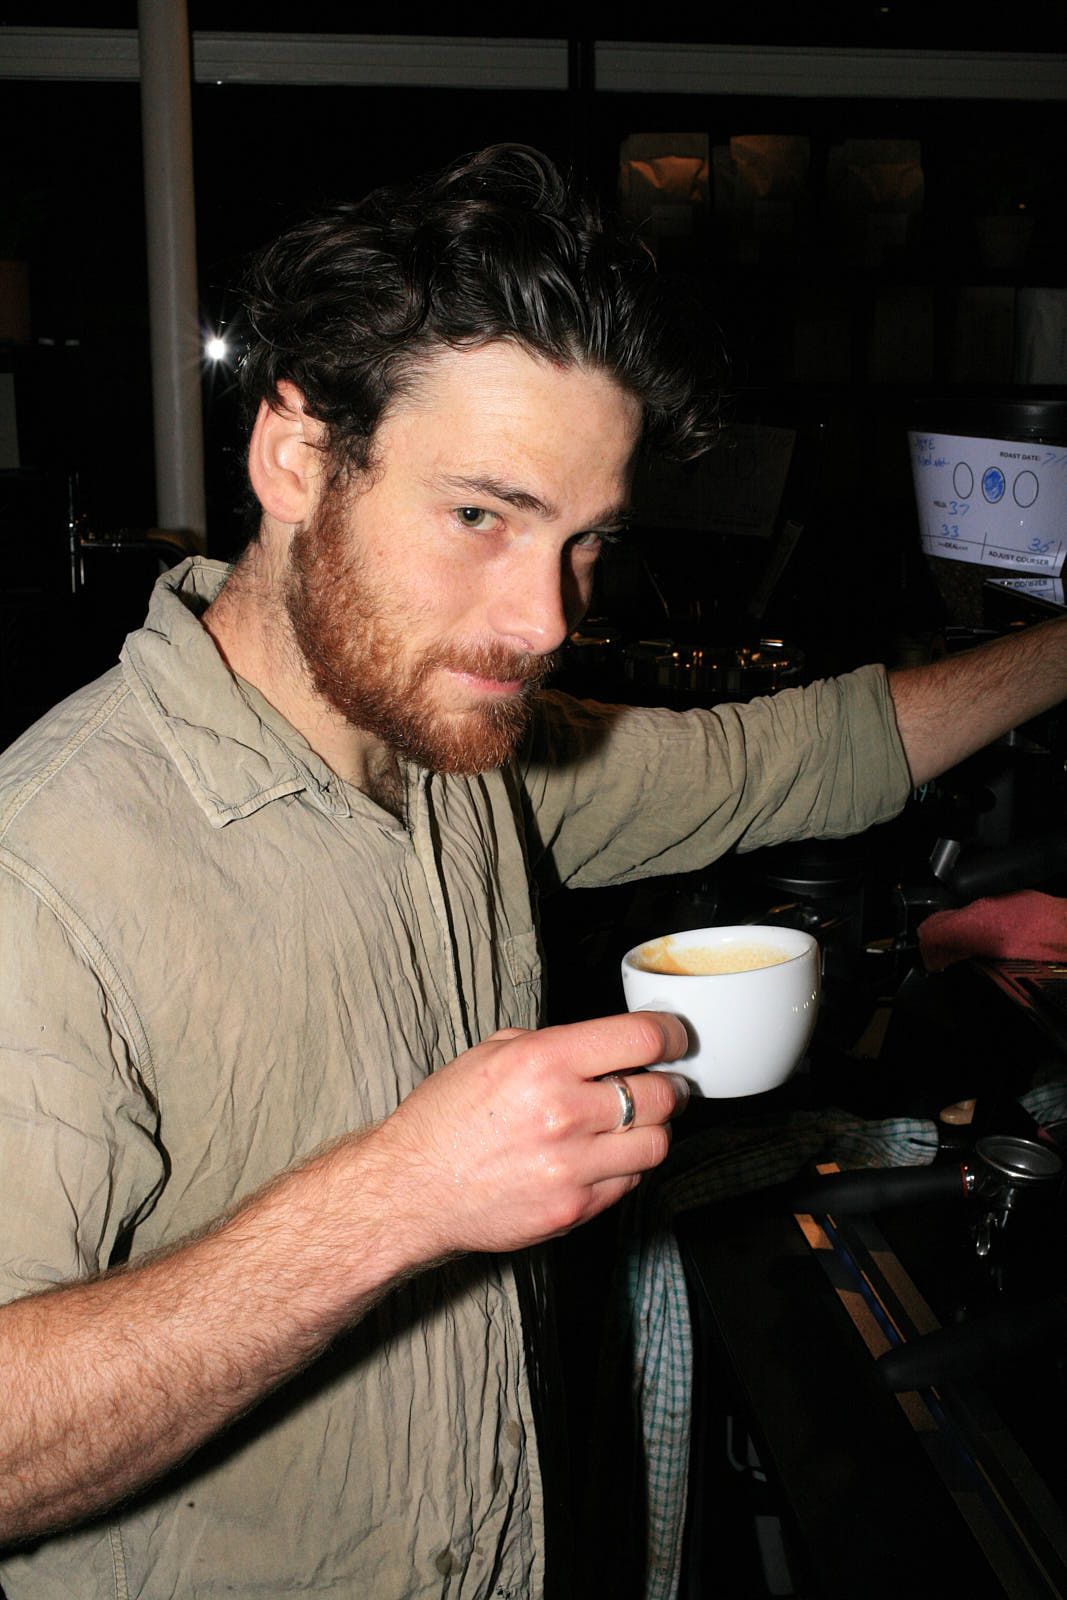 A barista in a beige shirt holds a half-drunk coffee cup.